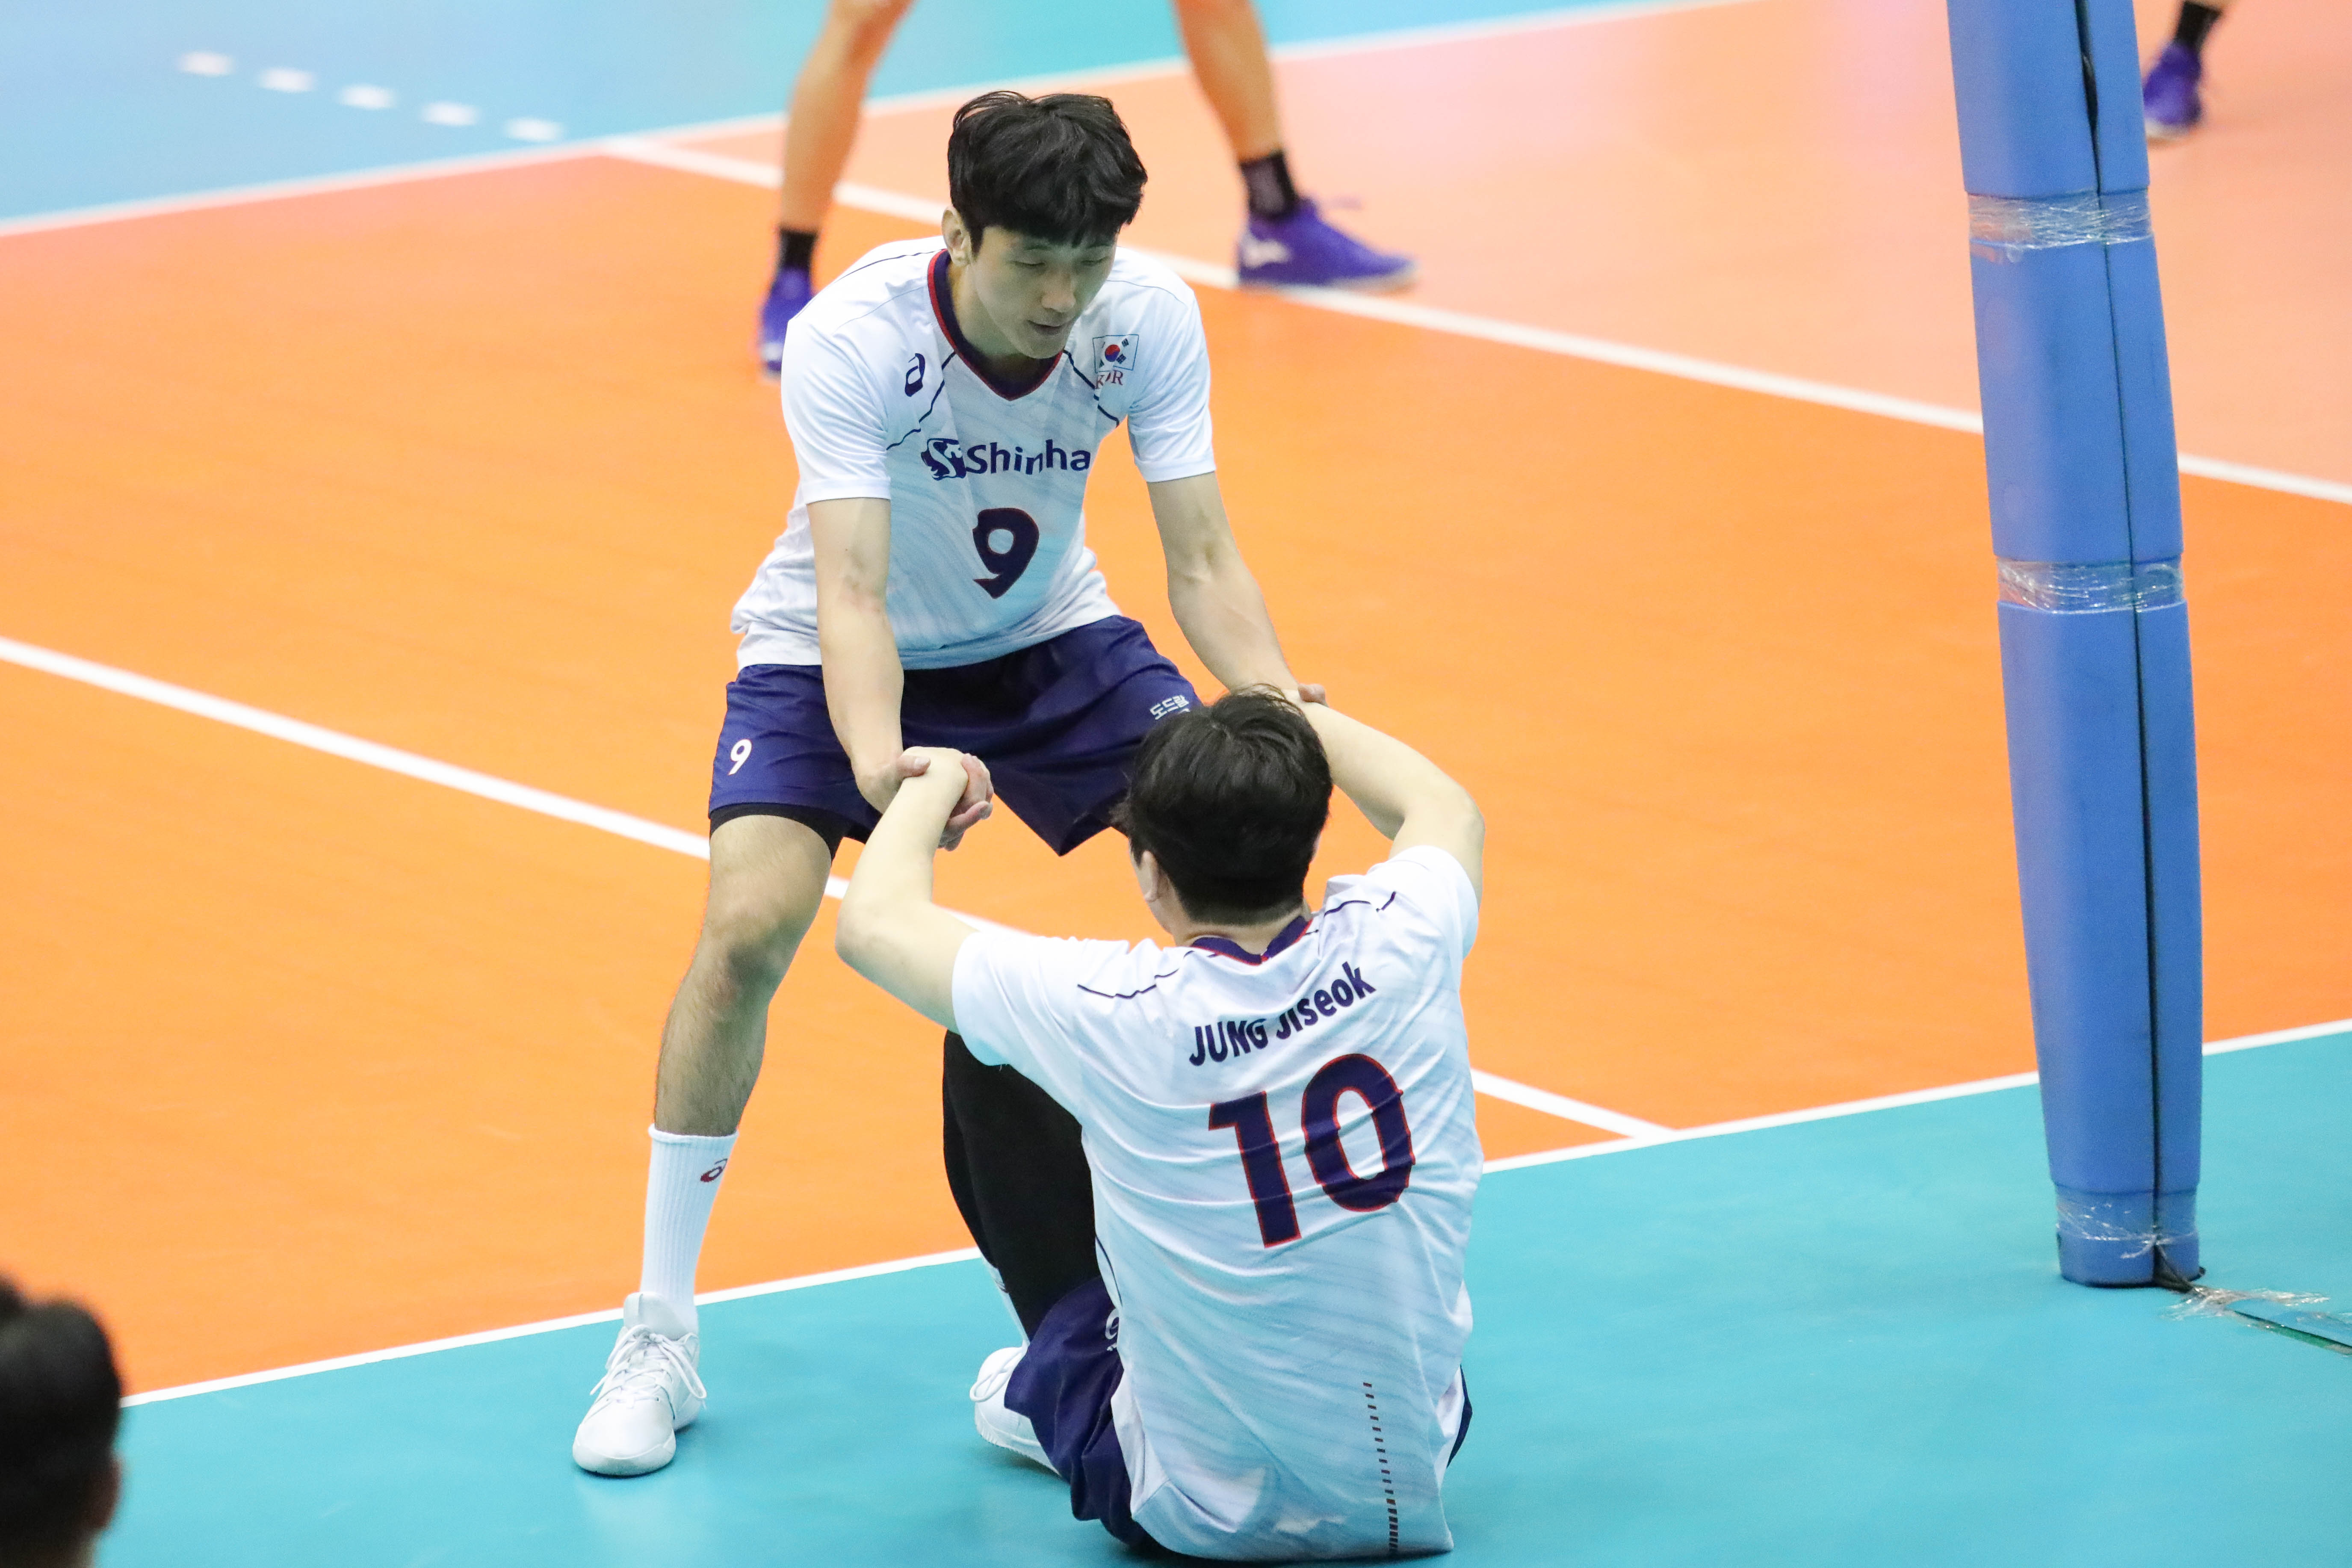 KOREA STRUGGLE TO BEAT CHINESE TAIPEI IN ACTION-PACKED ENCOUNTER